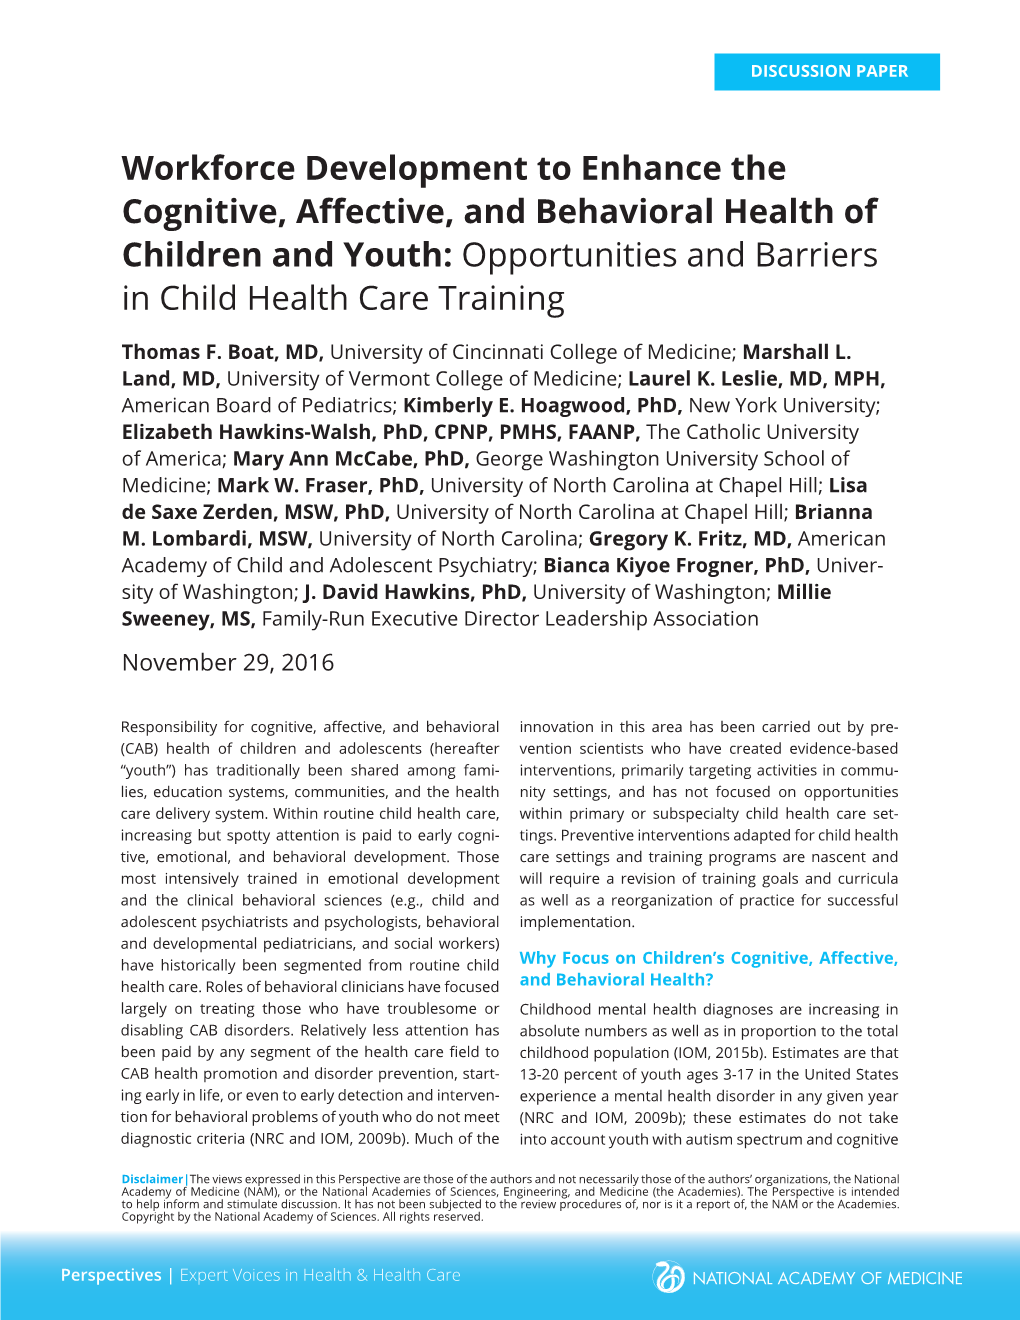 Workforce Development to Enhance the Cognitive, Affective, and Behavioral Health of Children and Youth: Opportunities and Barriers in Child Health Care Training